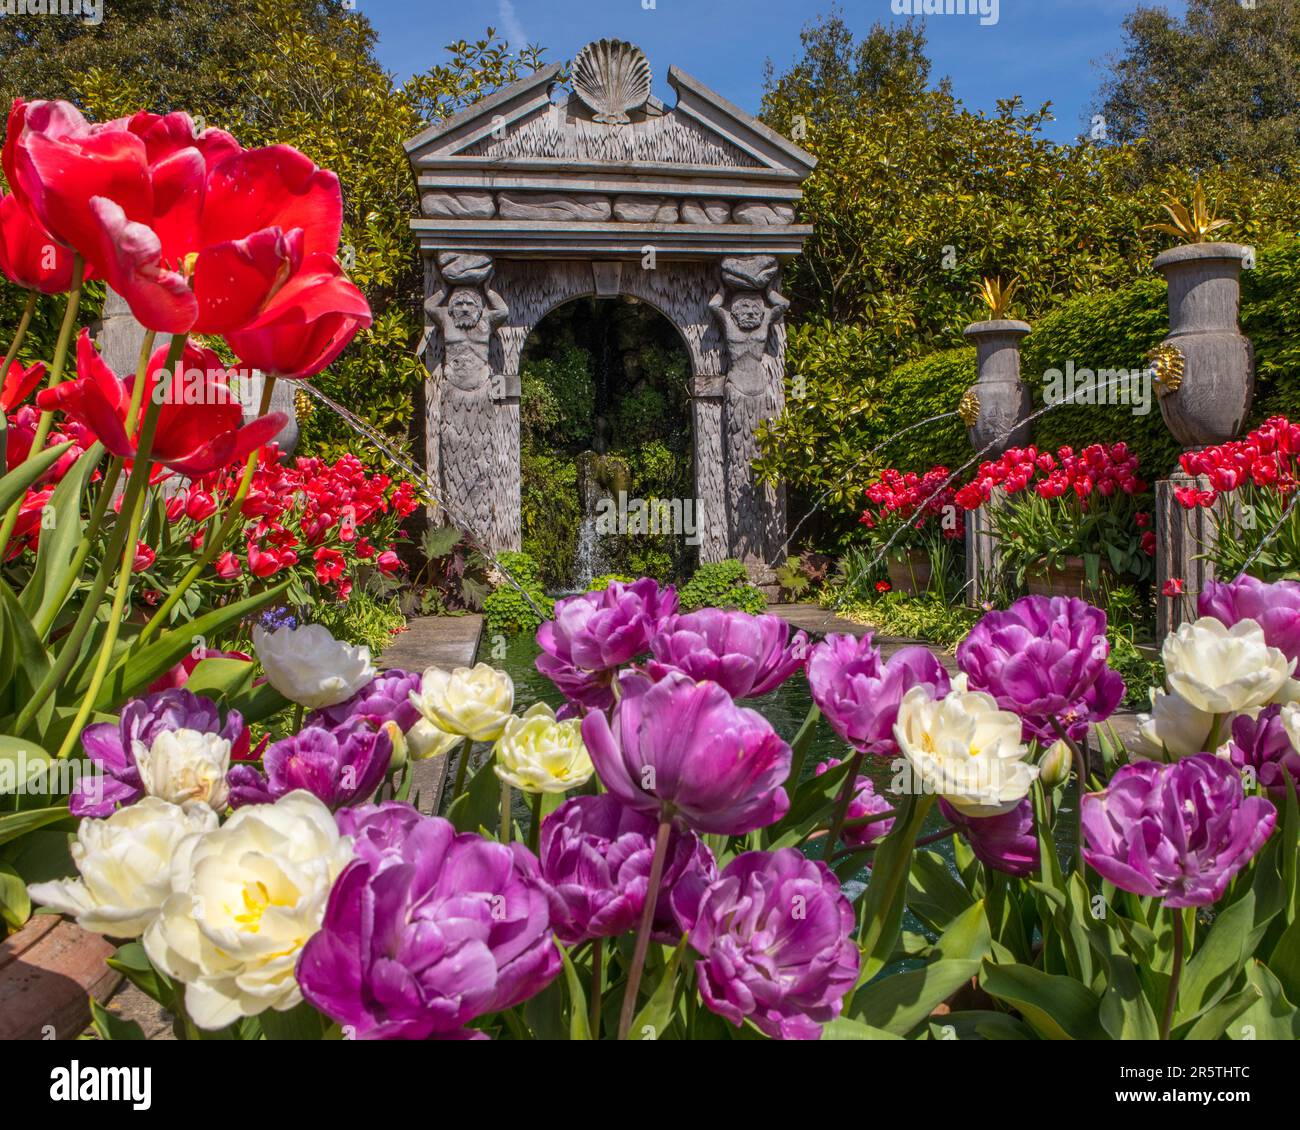 Sussex, UK - April 29th 2023: Beautiful Tulips in the gardens at the historic Arundel Castle in Arundel, West Sussex. Stock Photo